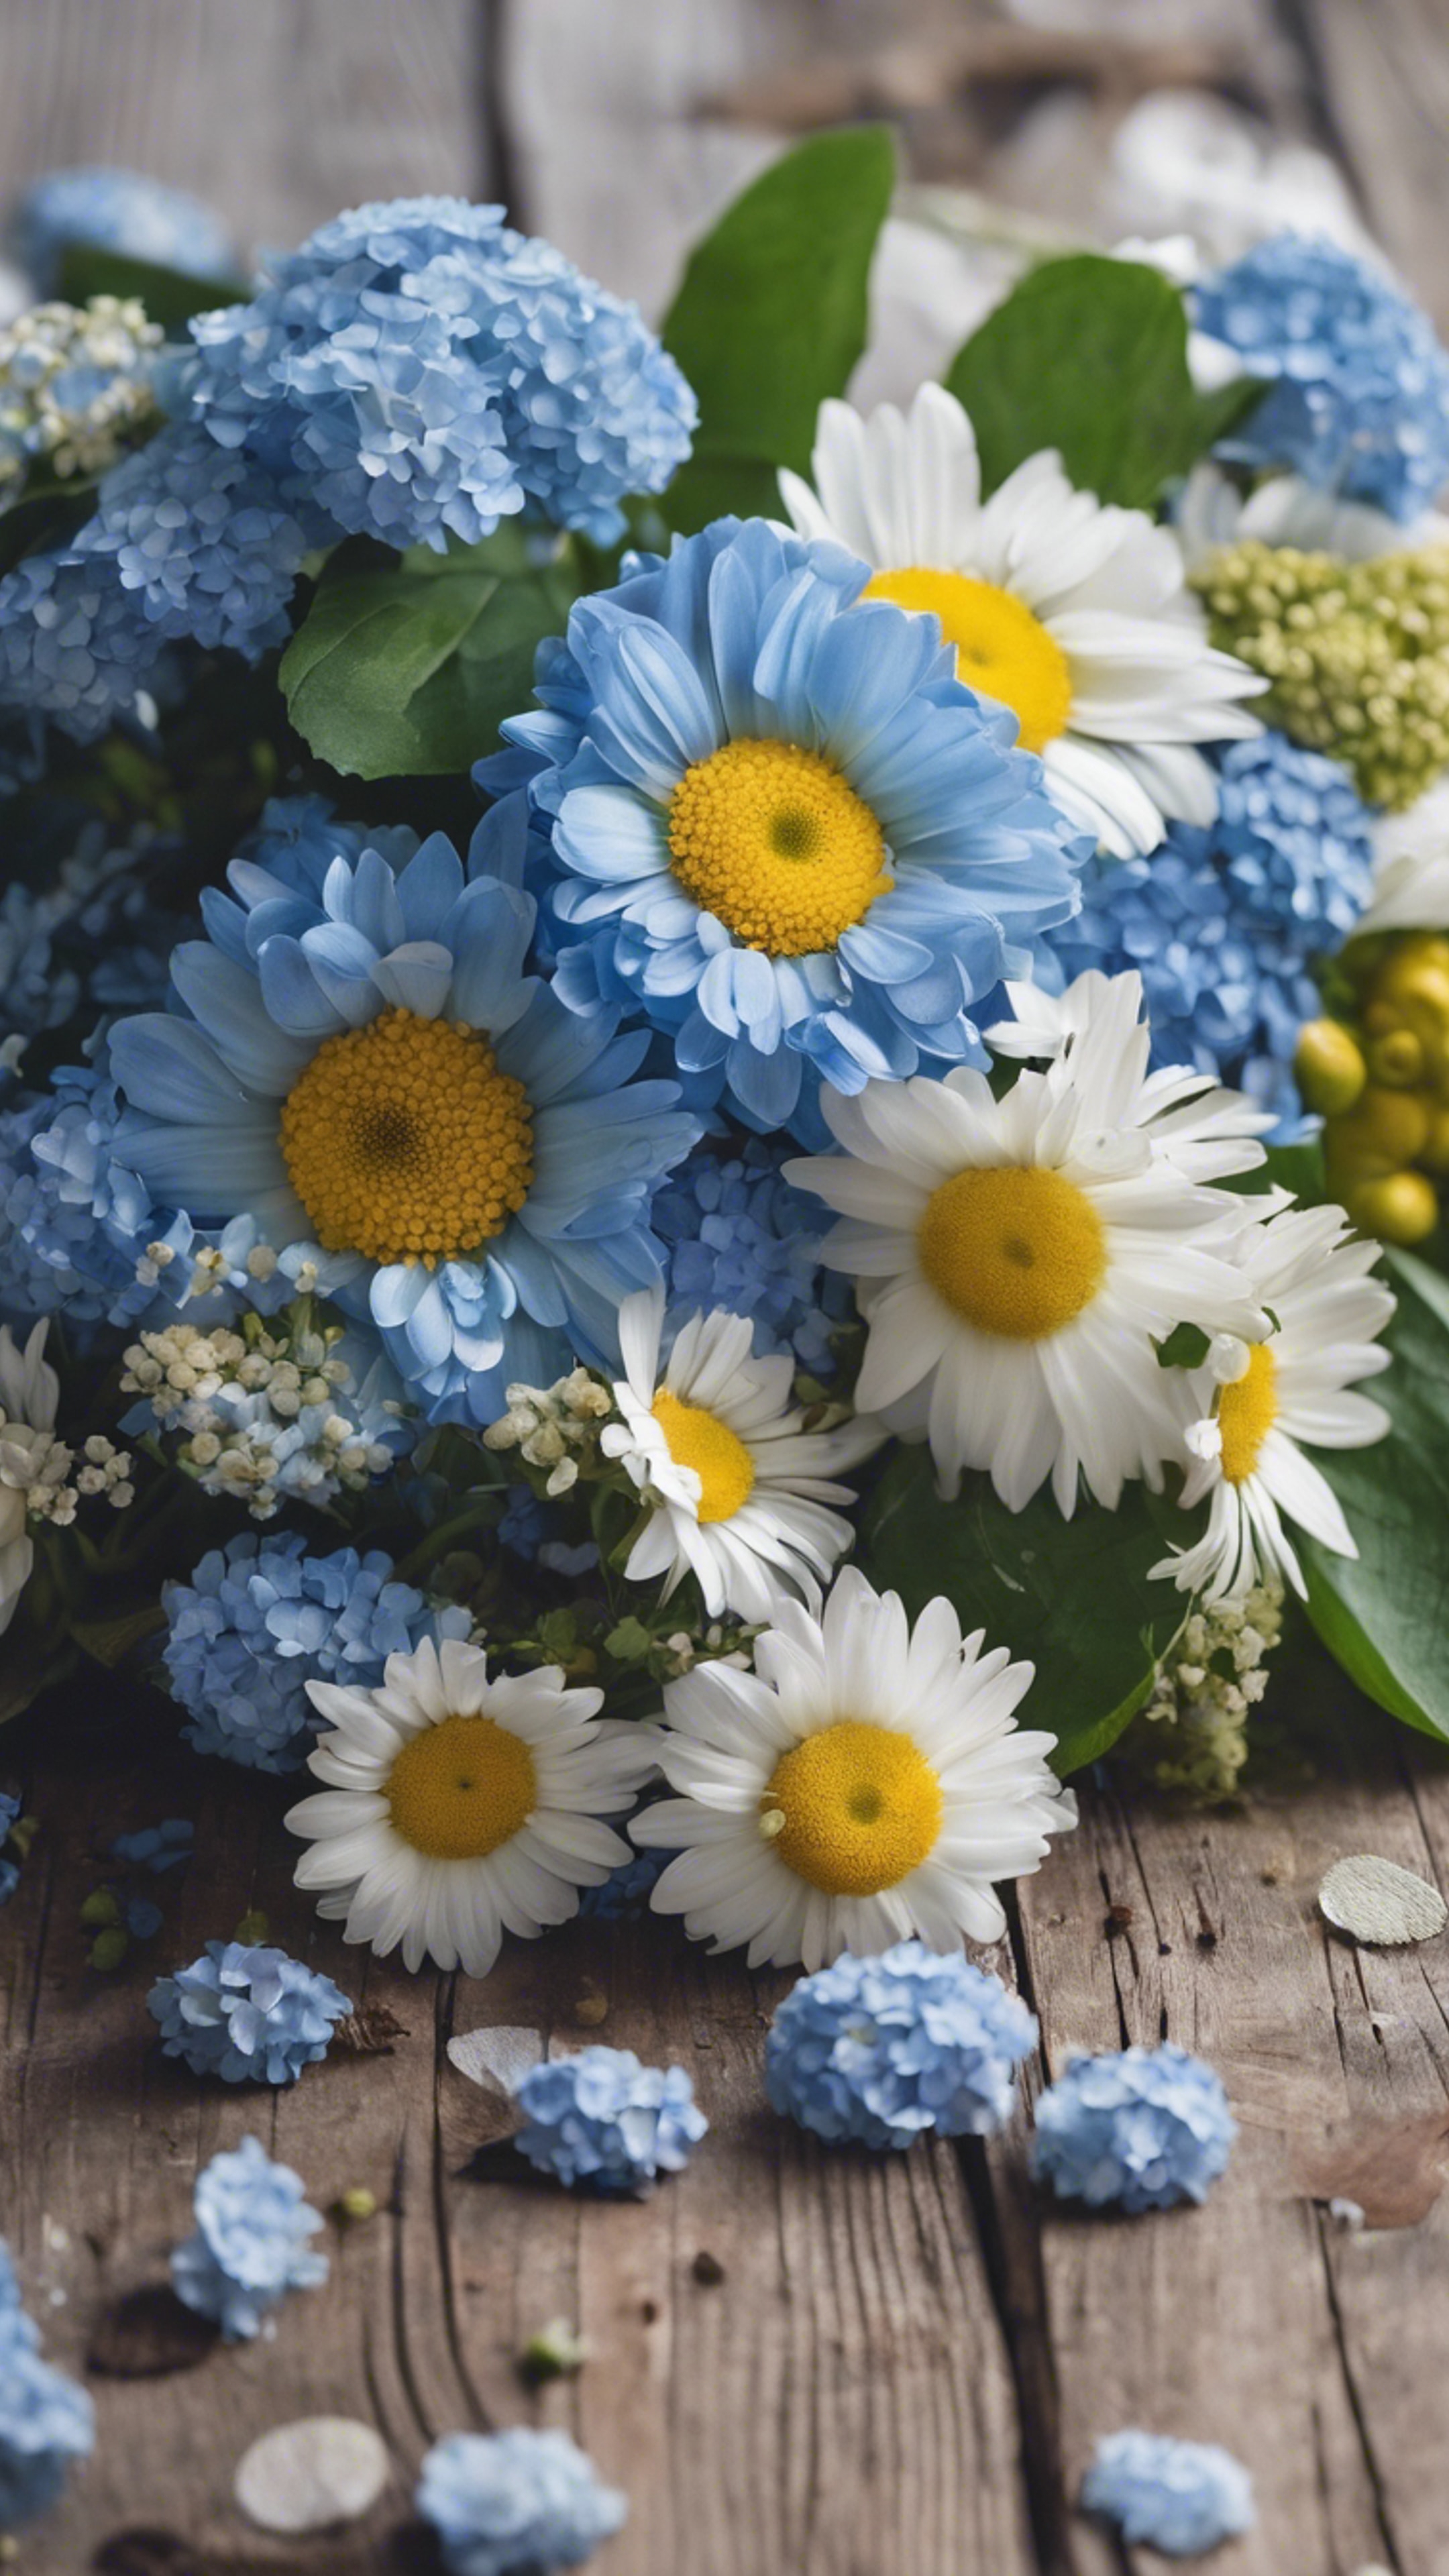 A bouquet of bright daisies and blue hydrangeas on a rustic wooden table. Wallpaper[684b7d41267b4730b987]